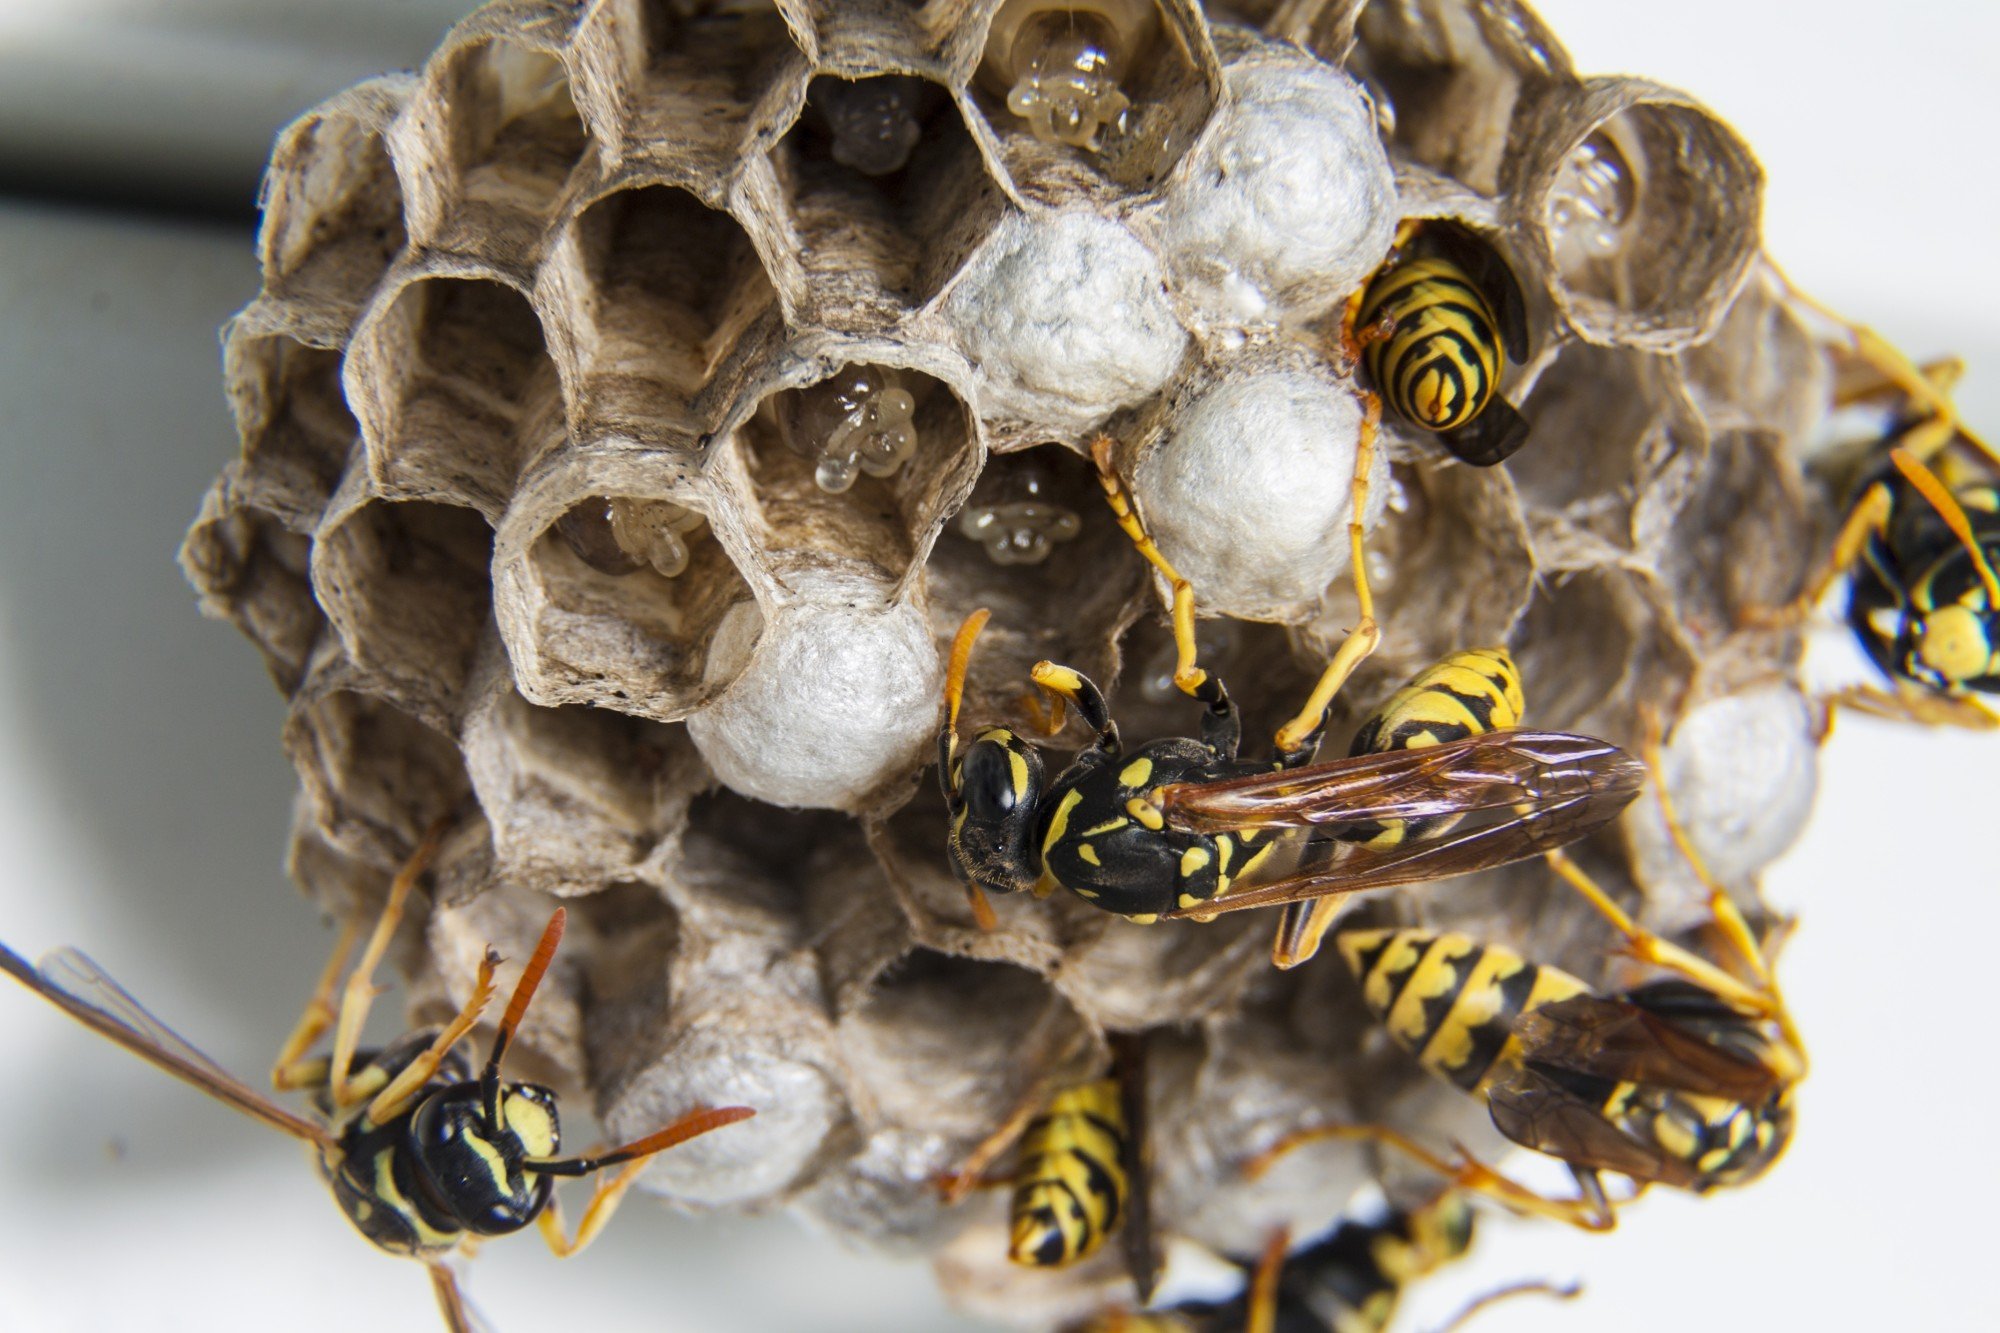 Don't let wasps ruin your outdoor activities! Discover three proven methods to prevent a wasp infestation and enjoy your days worry-free.